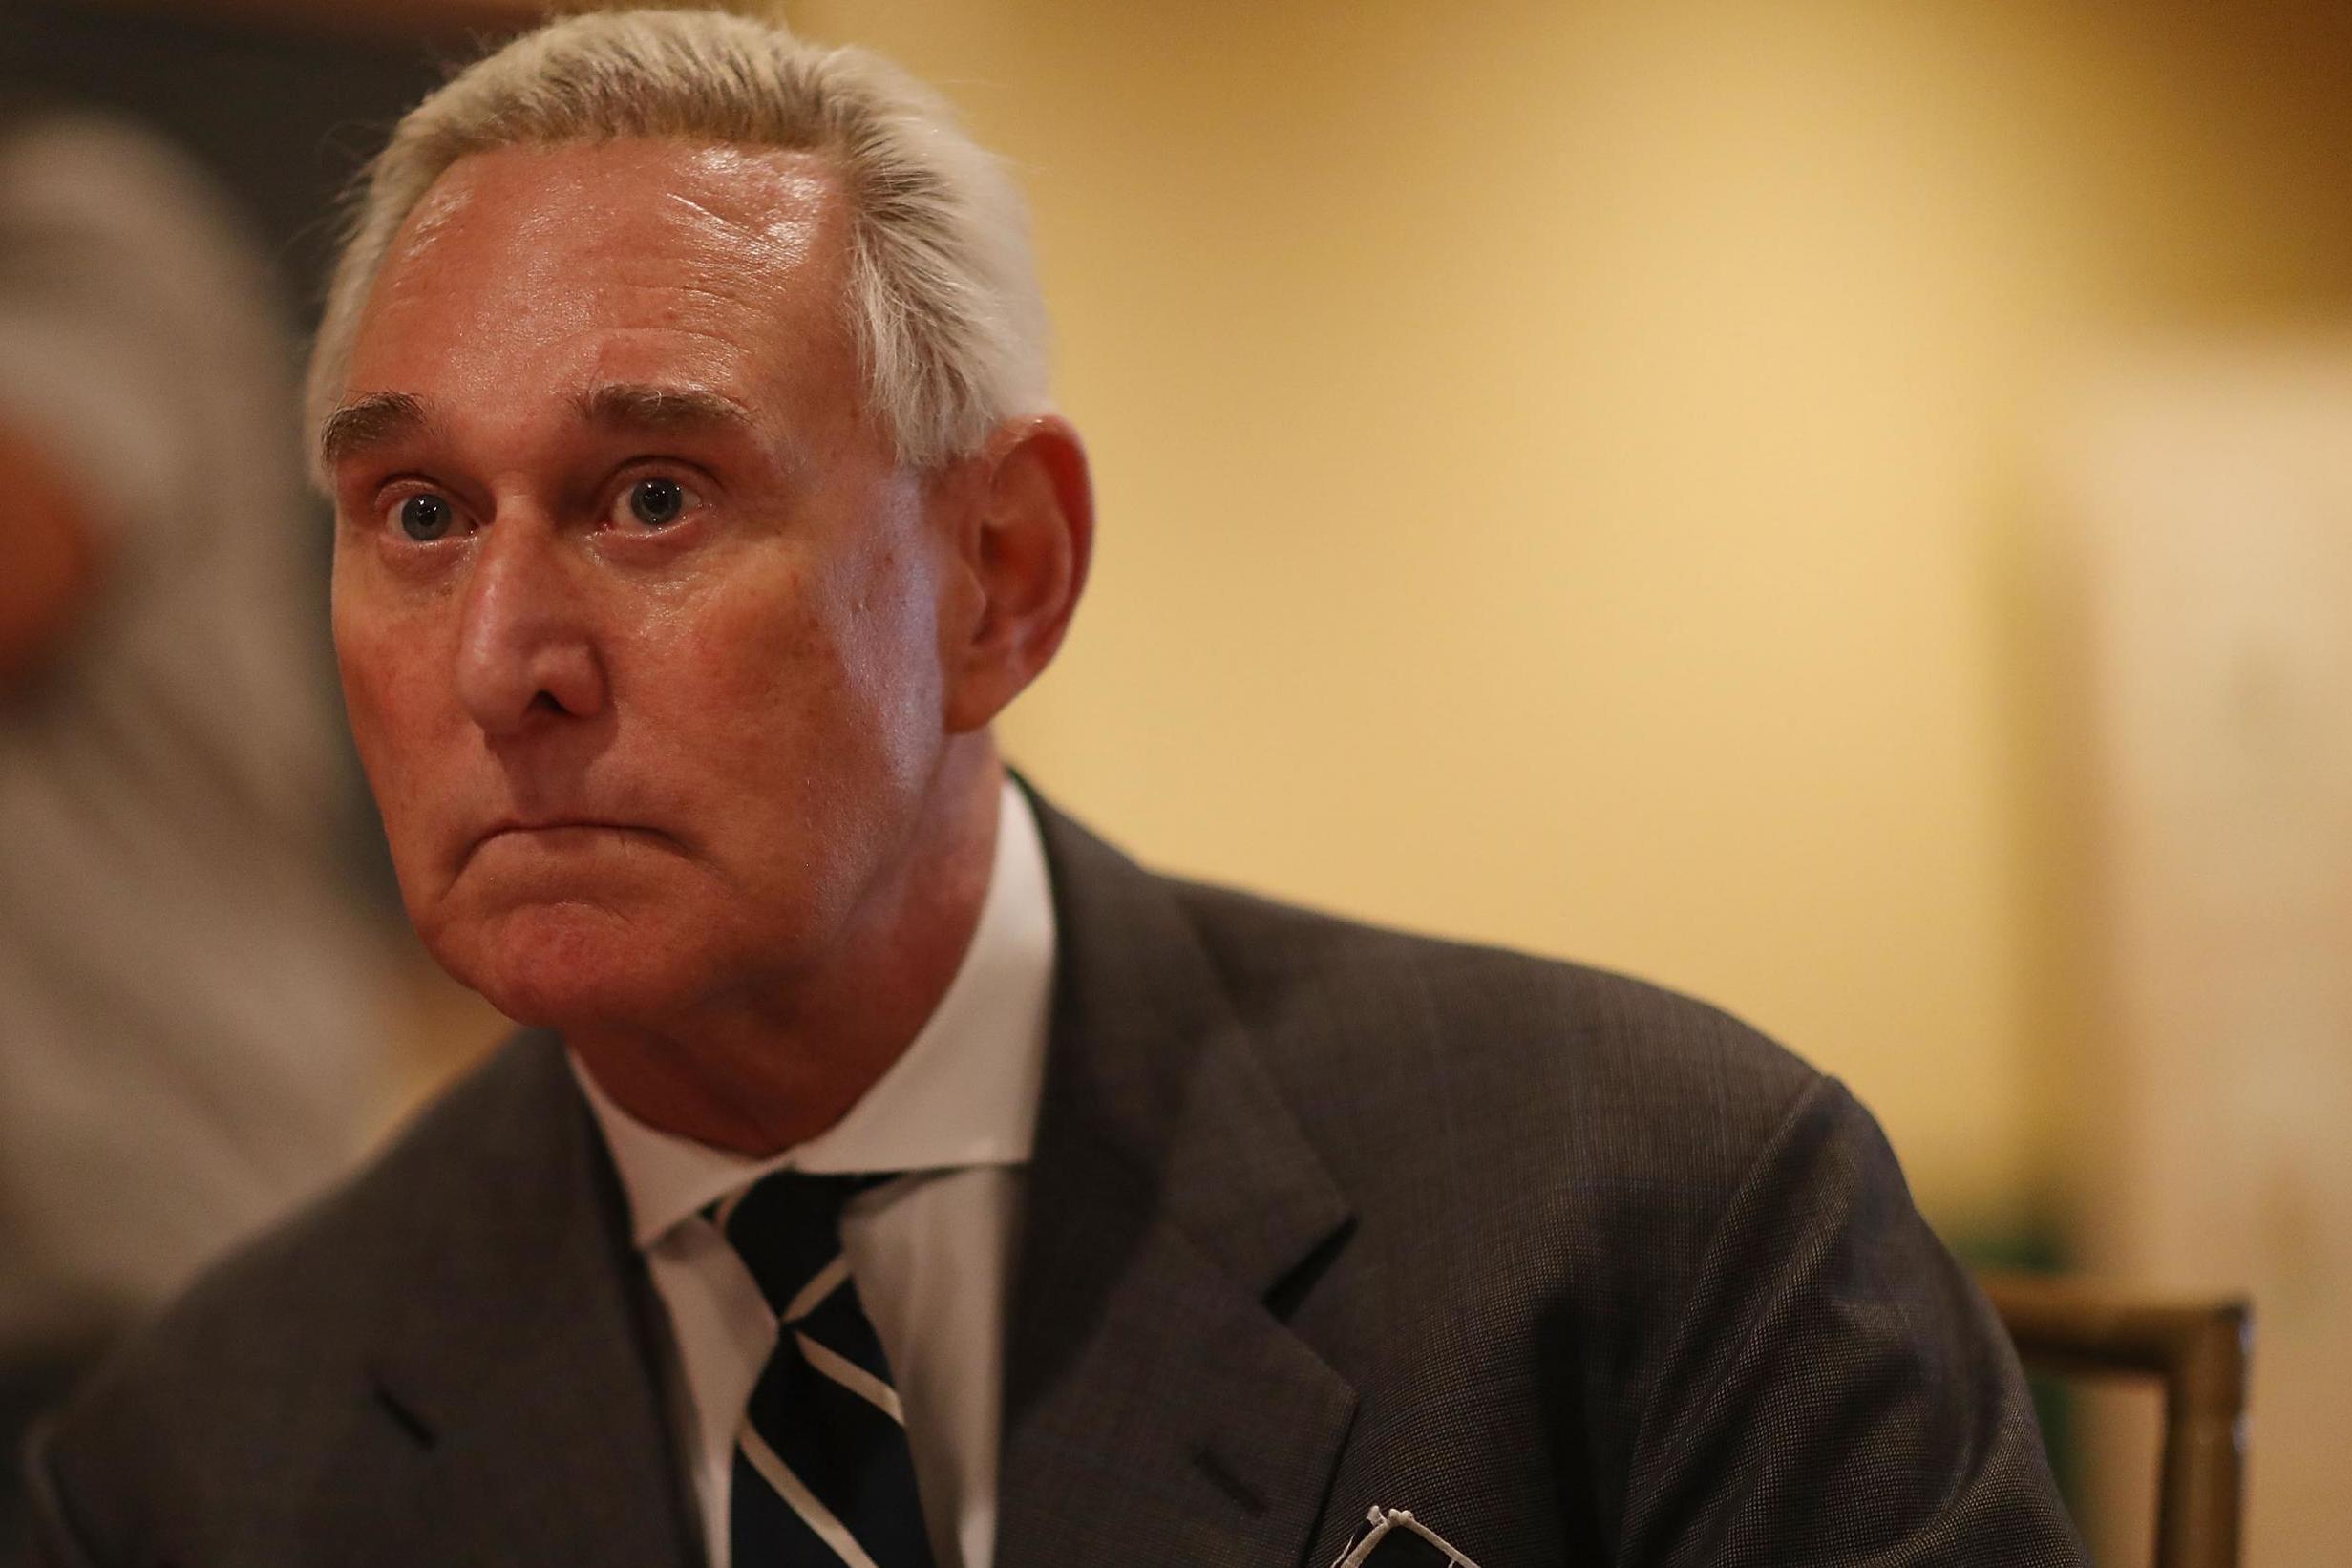 Roger Stone, longtime advisor to US President Donald Trump, said he thinks he is the next one to be indicted by special prosecutor Robert Mueller in the FBI's Russia investigation